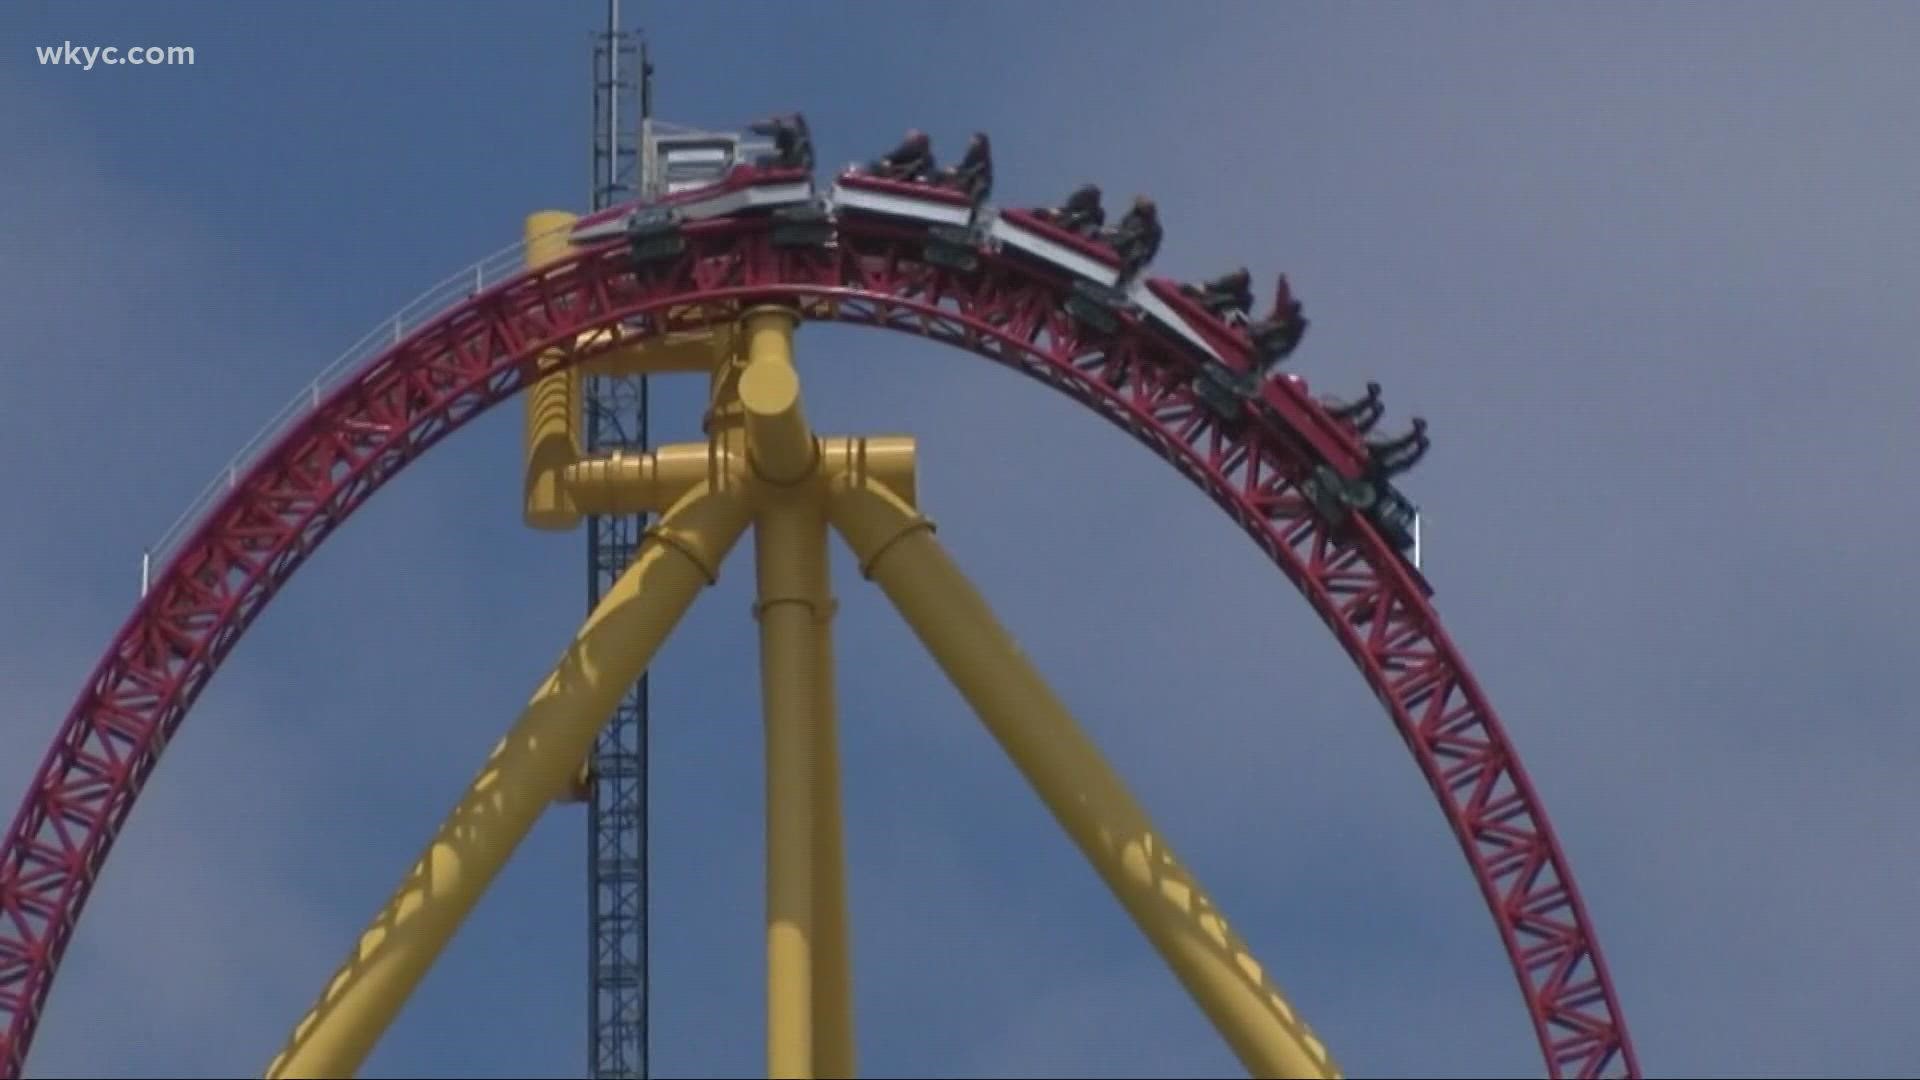 Investigators still don't know where the train was on Top Thrill Dragster when the piece came off, or how it happened in the first place. Lynna Lai has more.